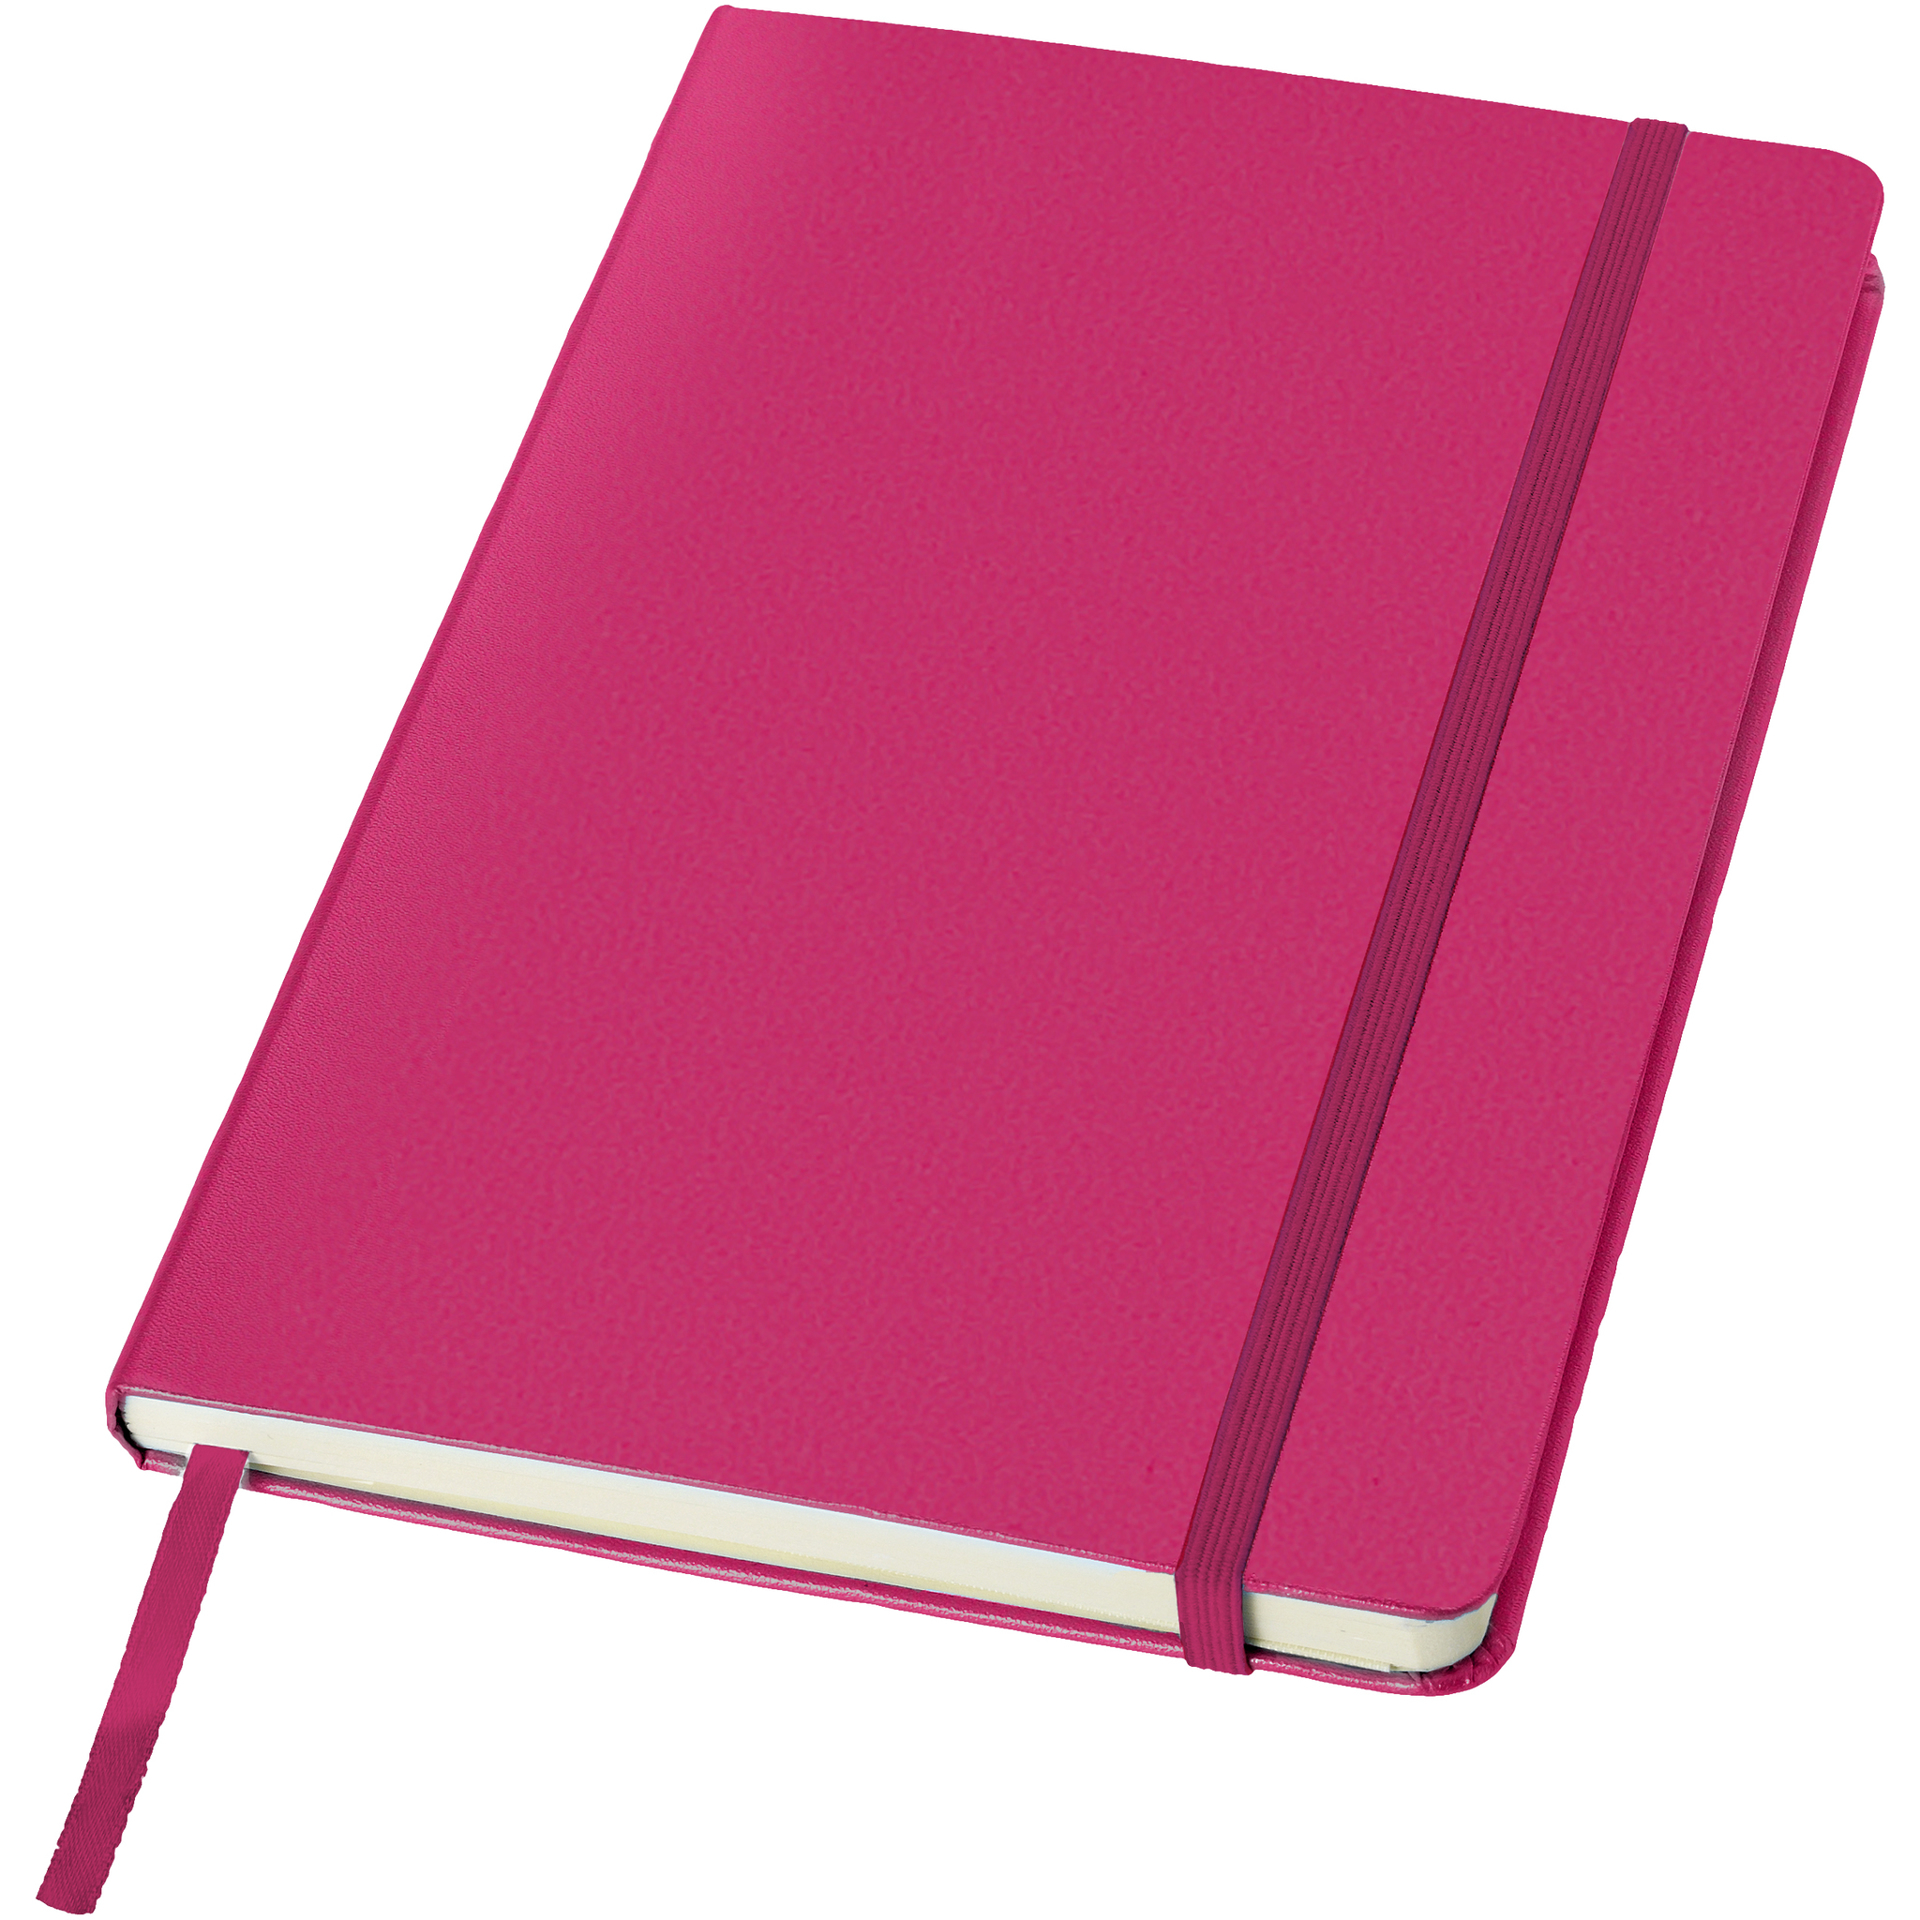 A5 hard cover notebook in pink with pink elastic closure and ribbon